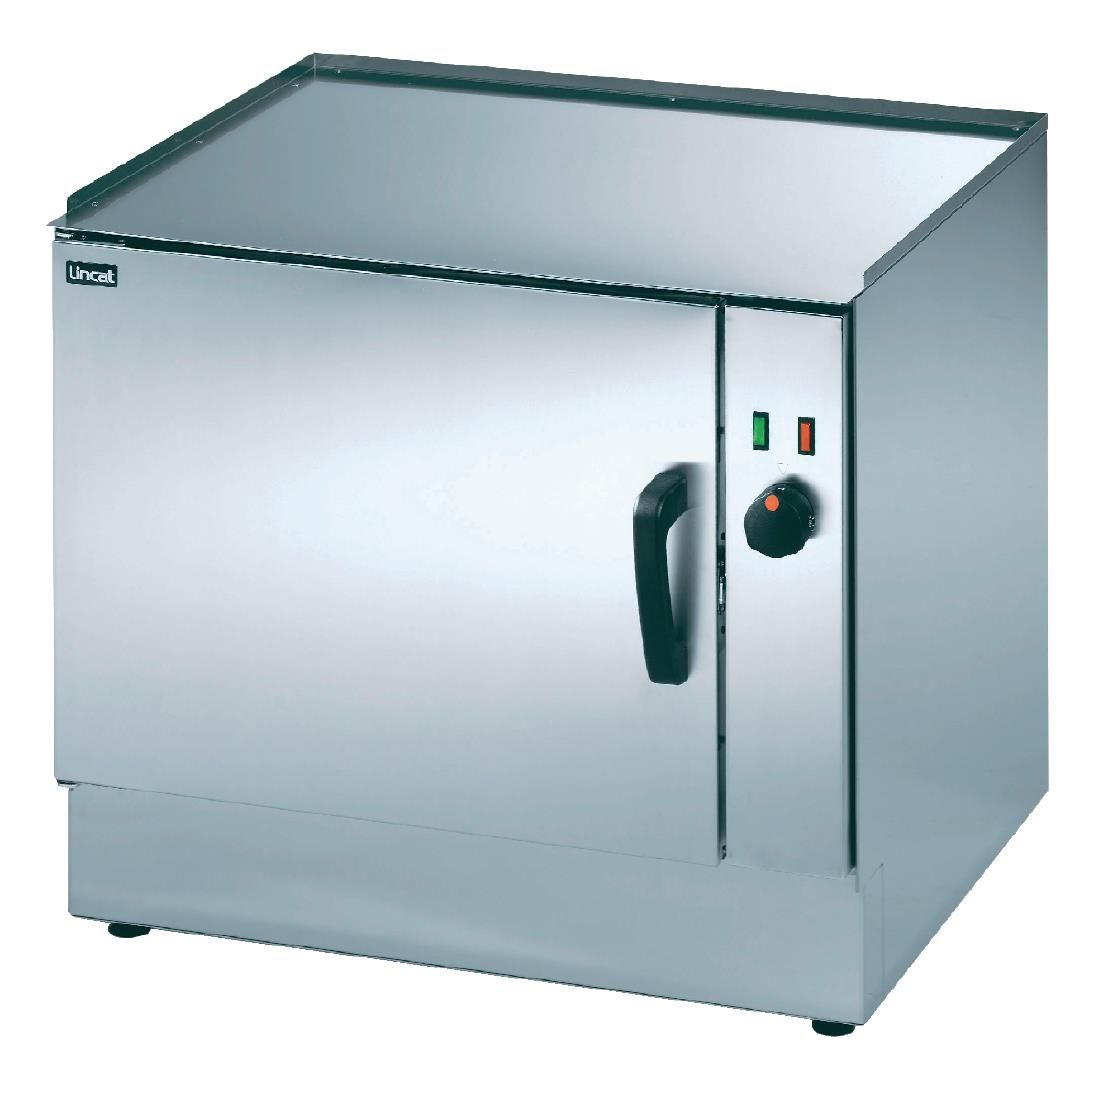 V7/4 - Lincat Silverlink 600 Electric Free-standing Oven - Fan-assisted - Larger size - W 750 mm - 4.0 kW